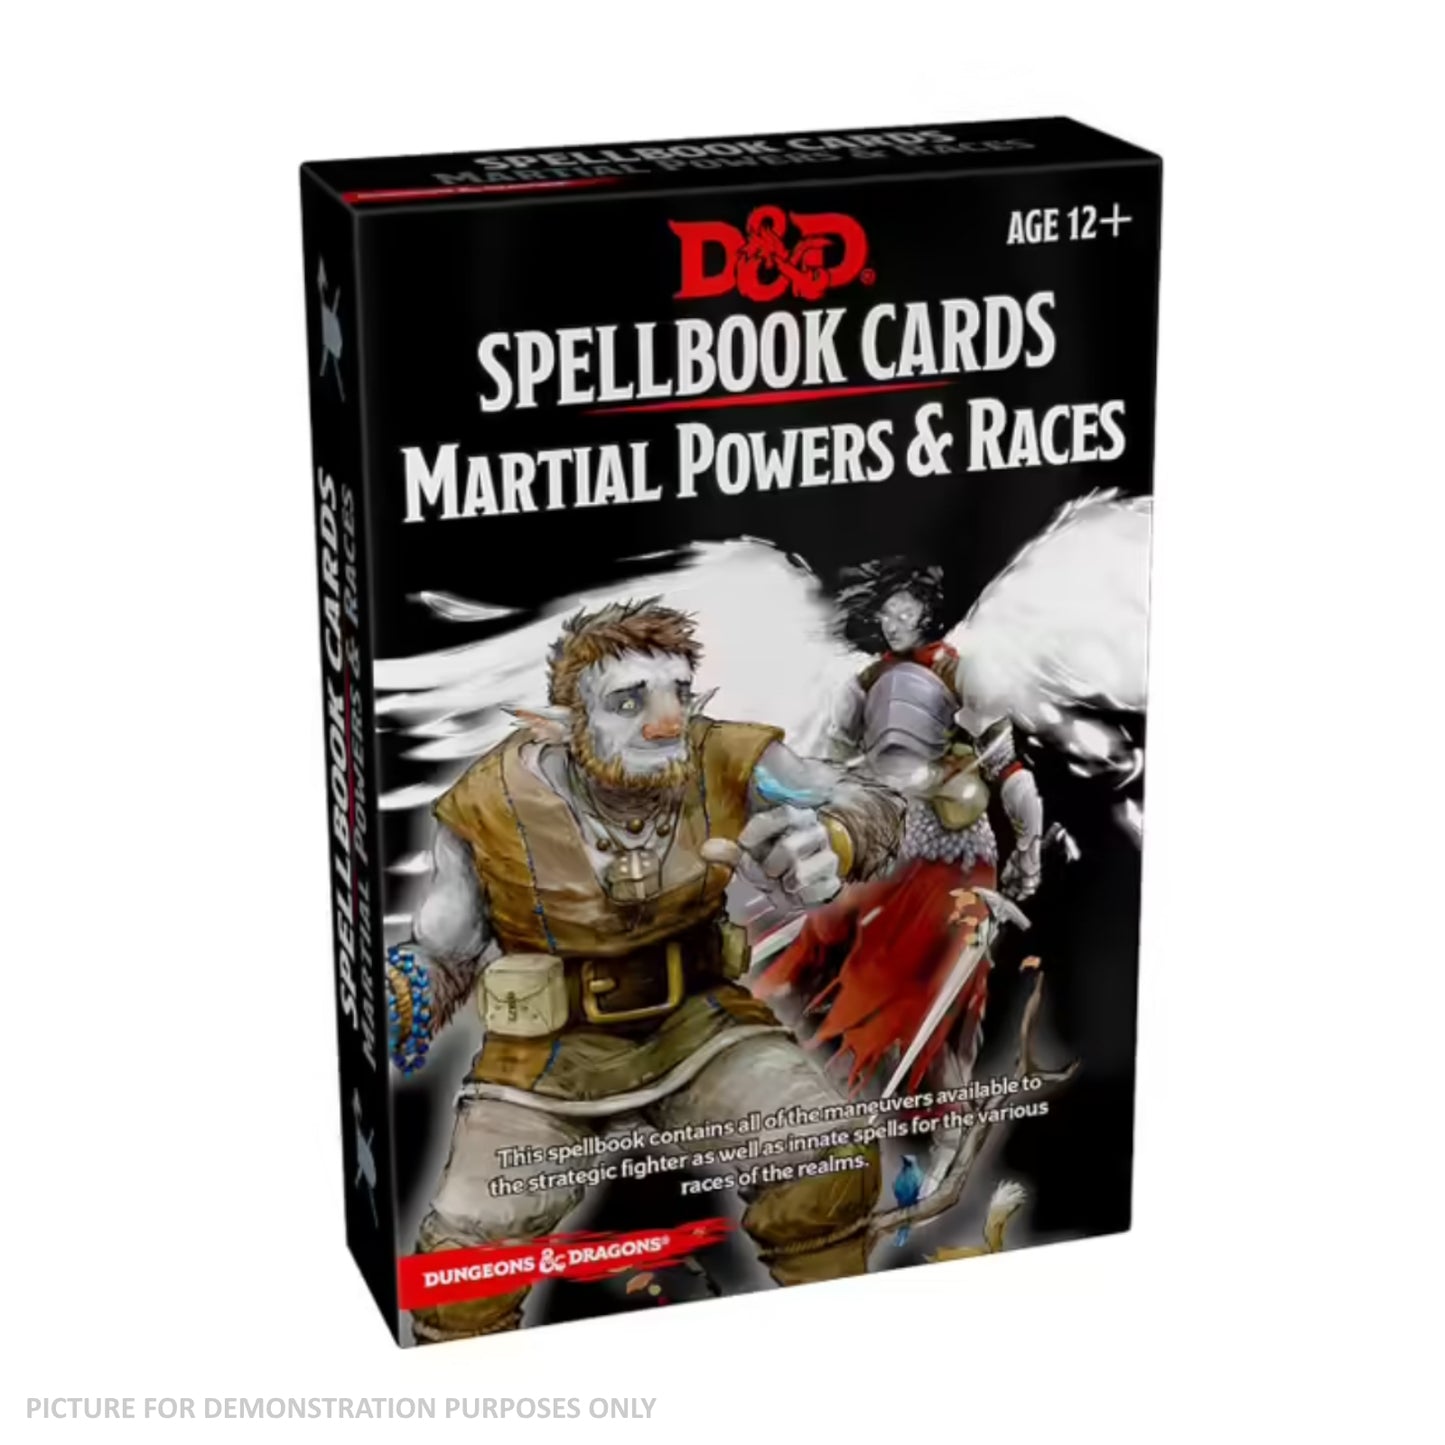 Dungeons & Dragons Spellbook Cards Martial Powers & Races Deck Revised 2017 Edition